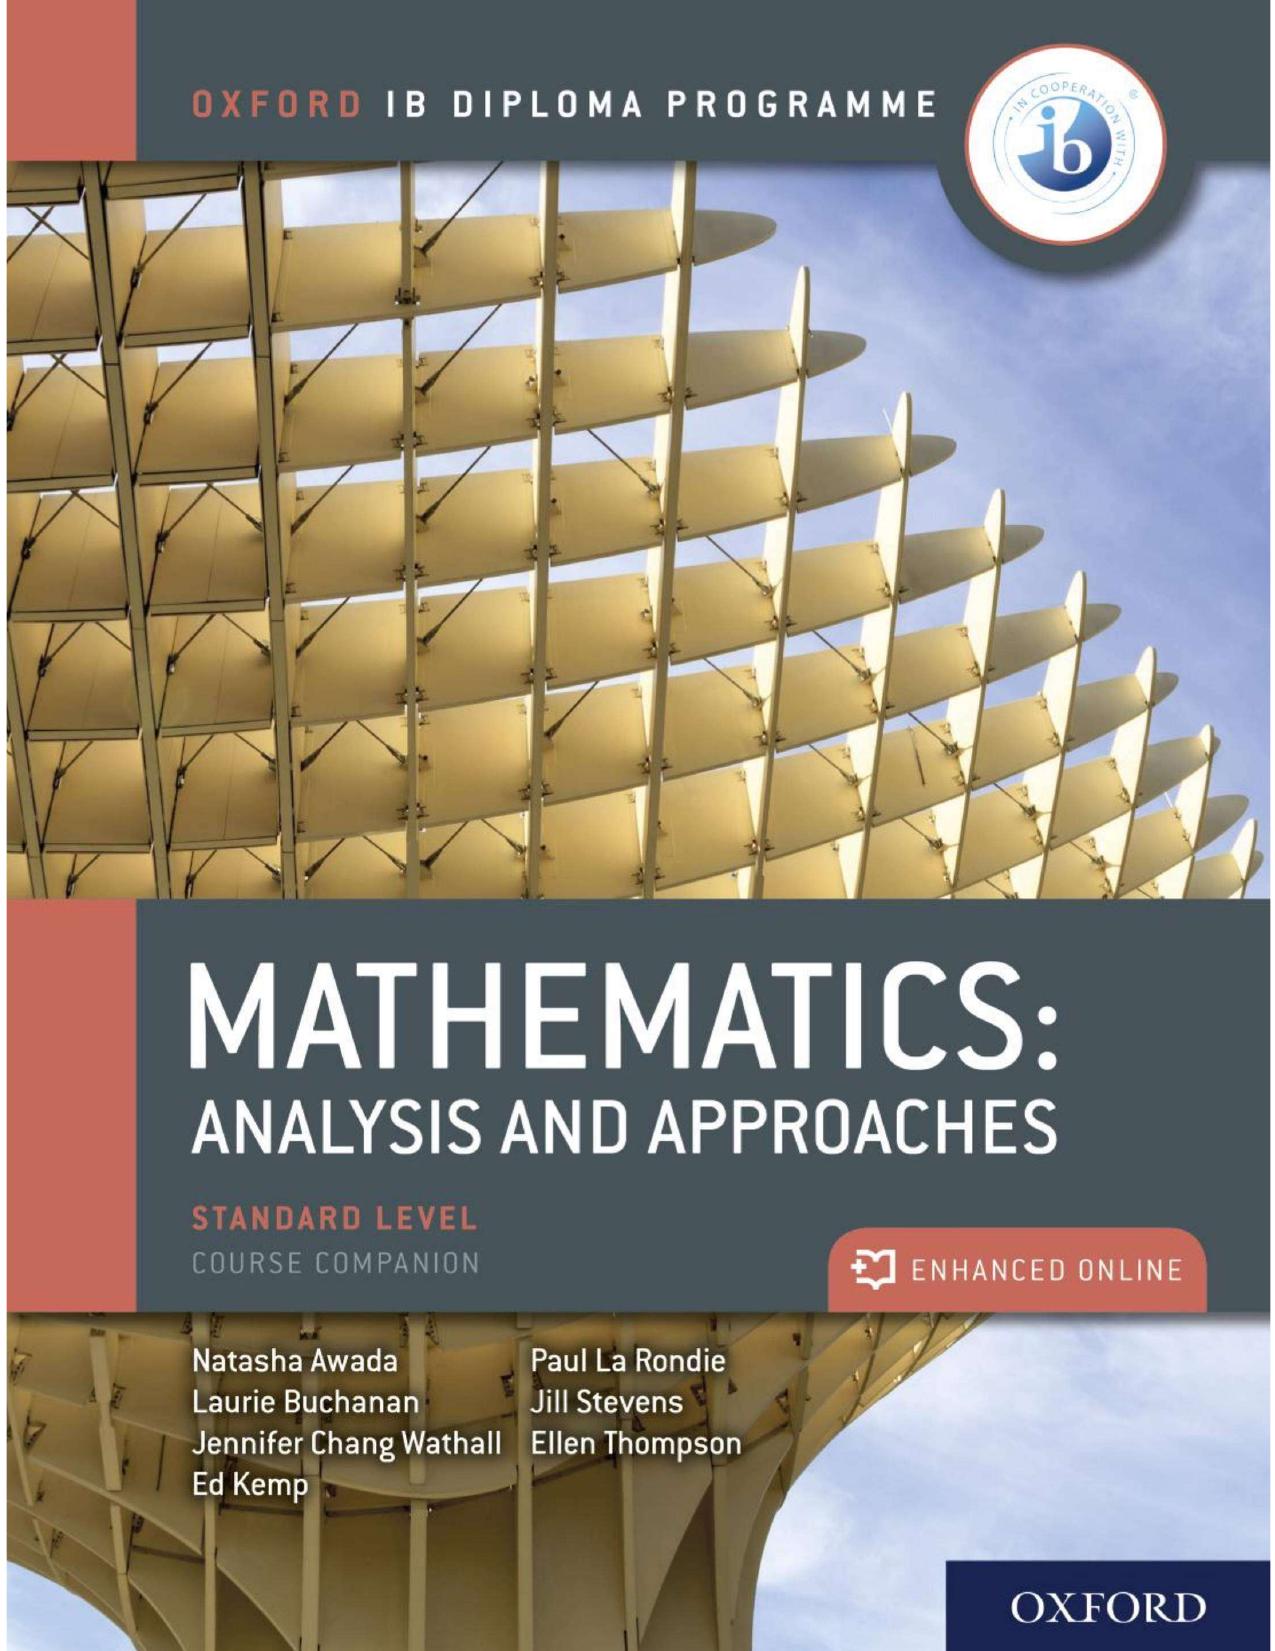 Mathematics: Analysis and Approaches. Standard Level. Course Companion